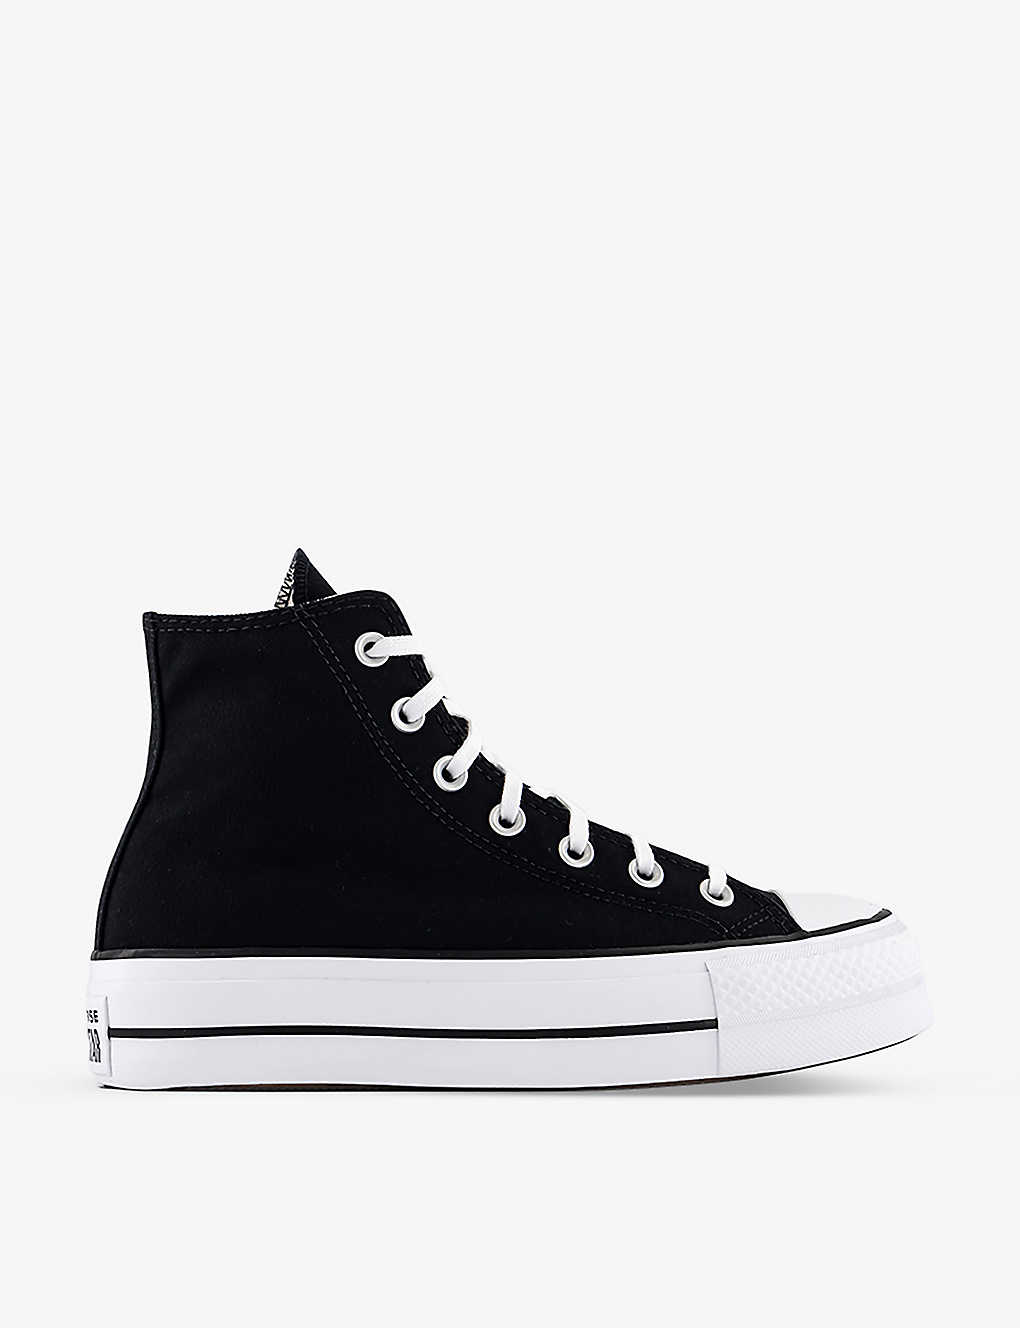 Converse All Star Lift High-top Flatform Trainers In Black White